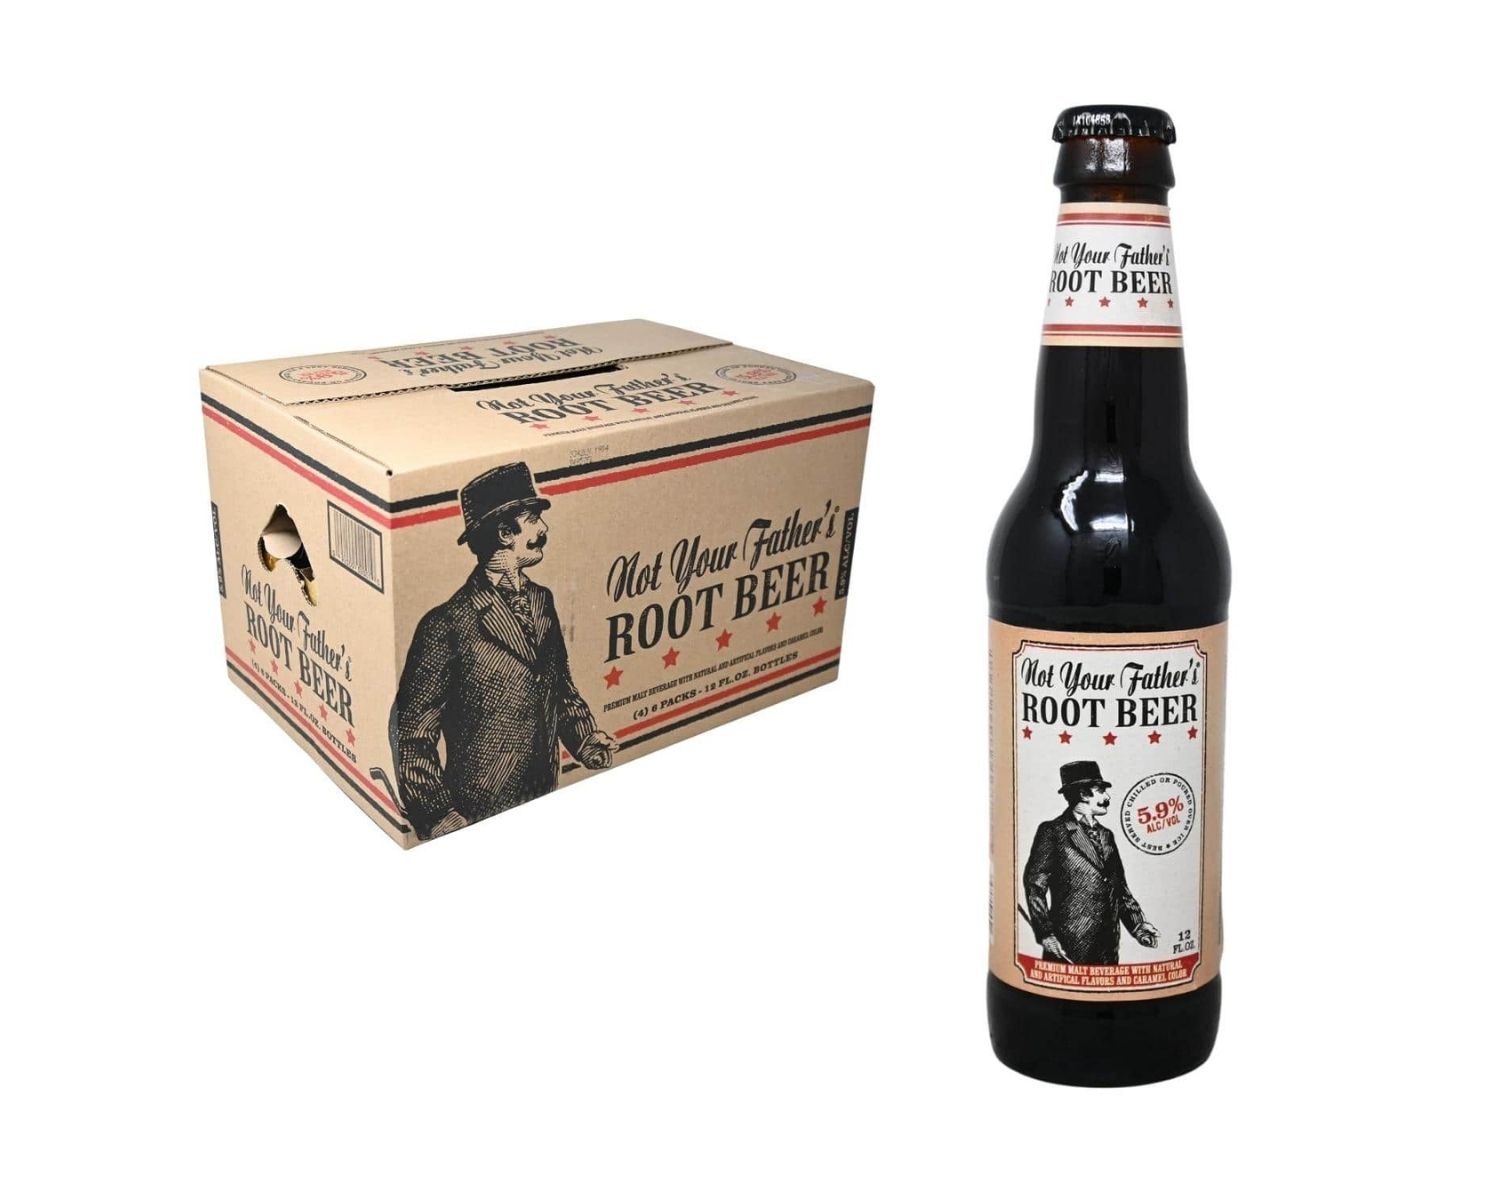 10-captivating-facts-about-not-your-fathers-root-beer